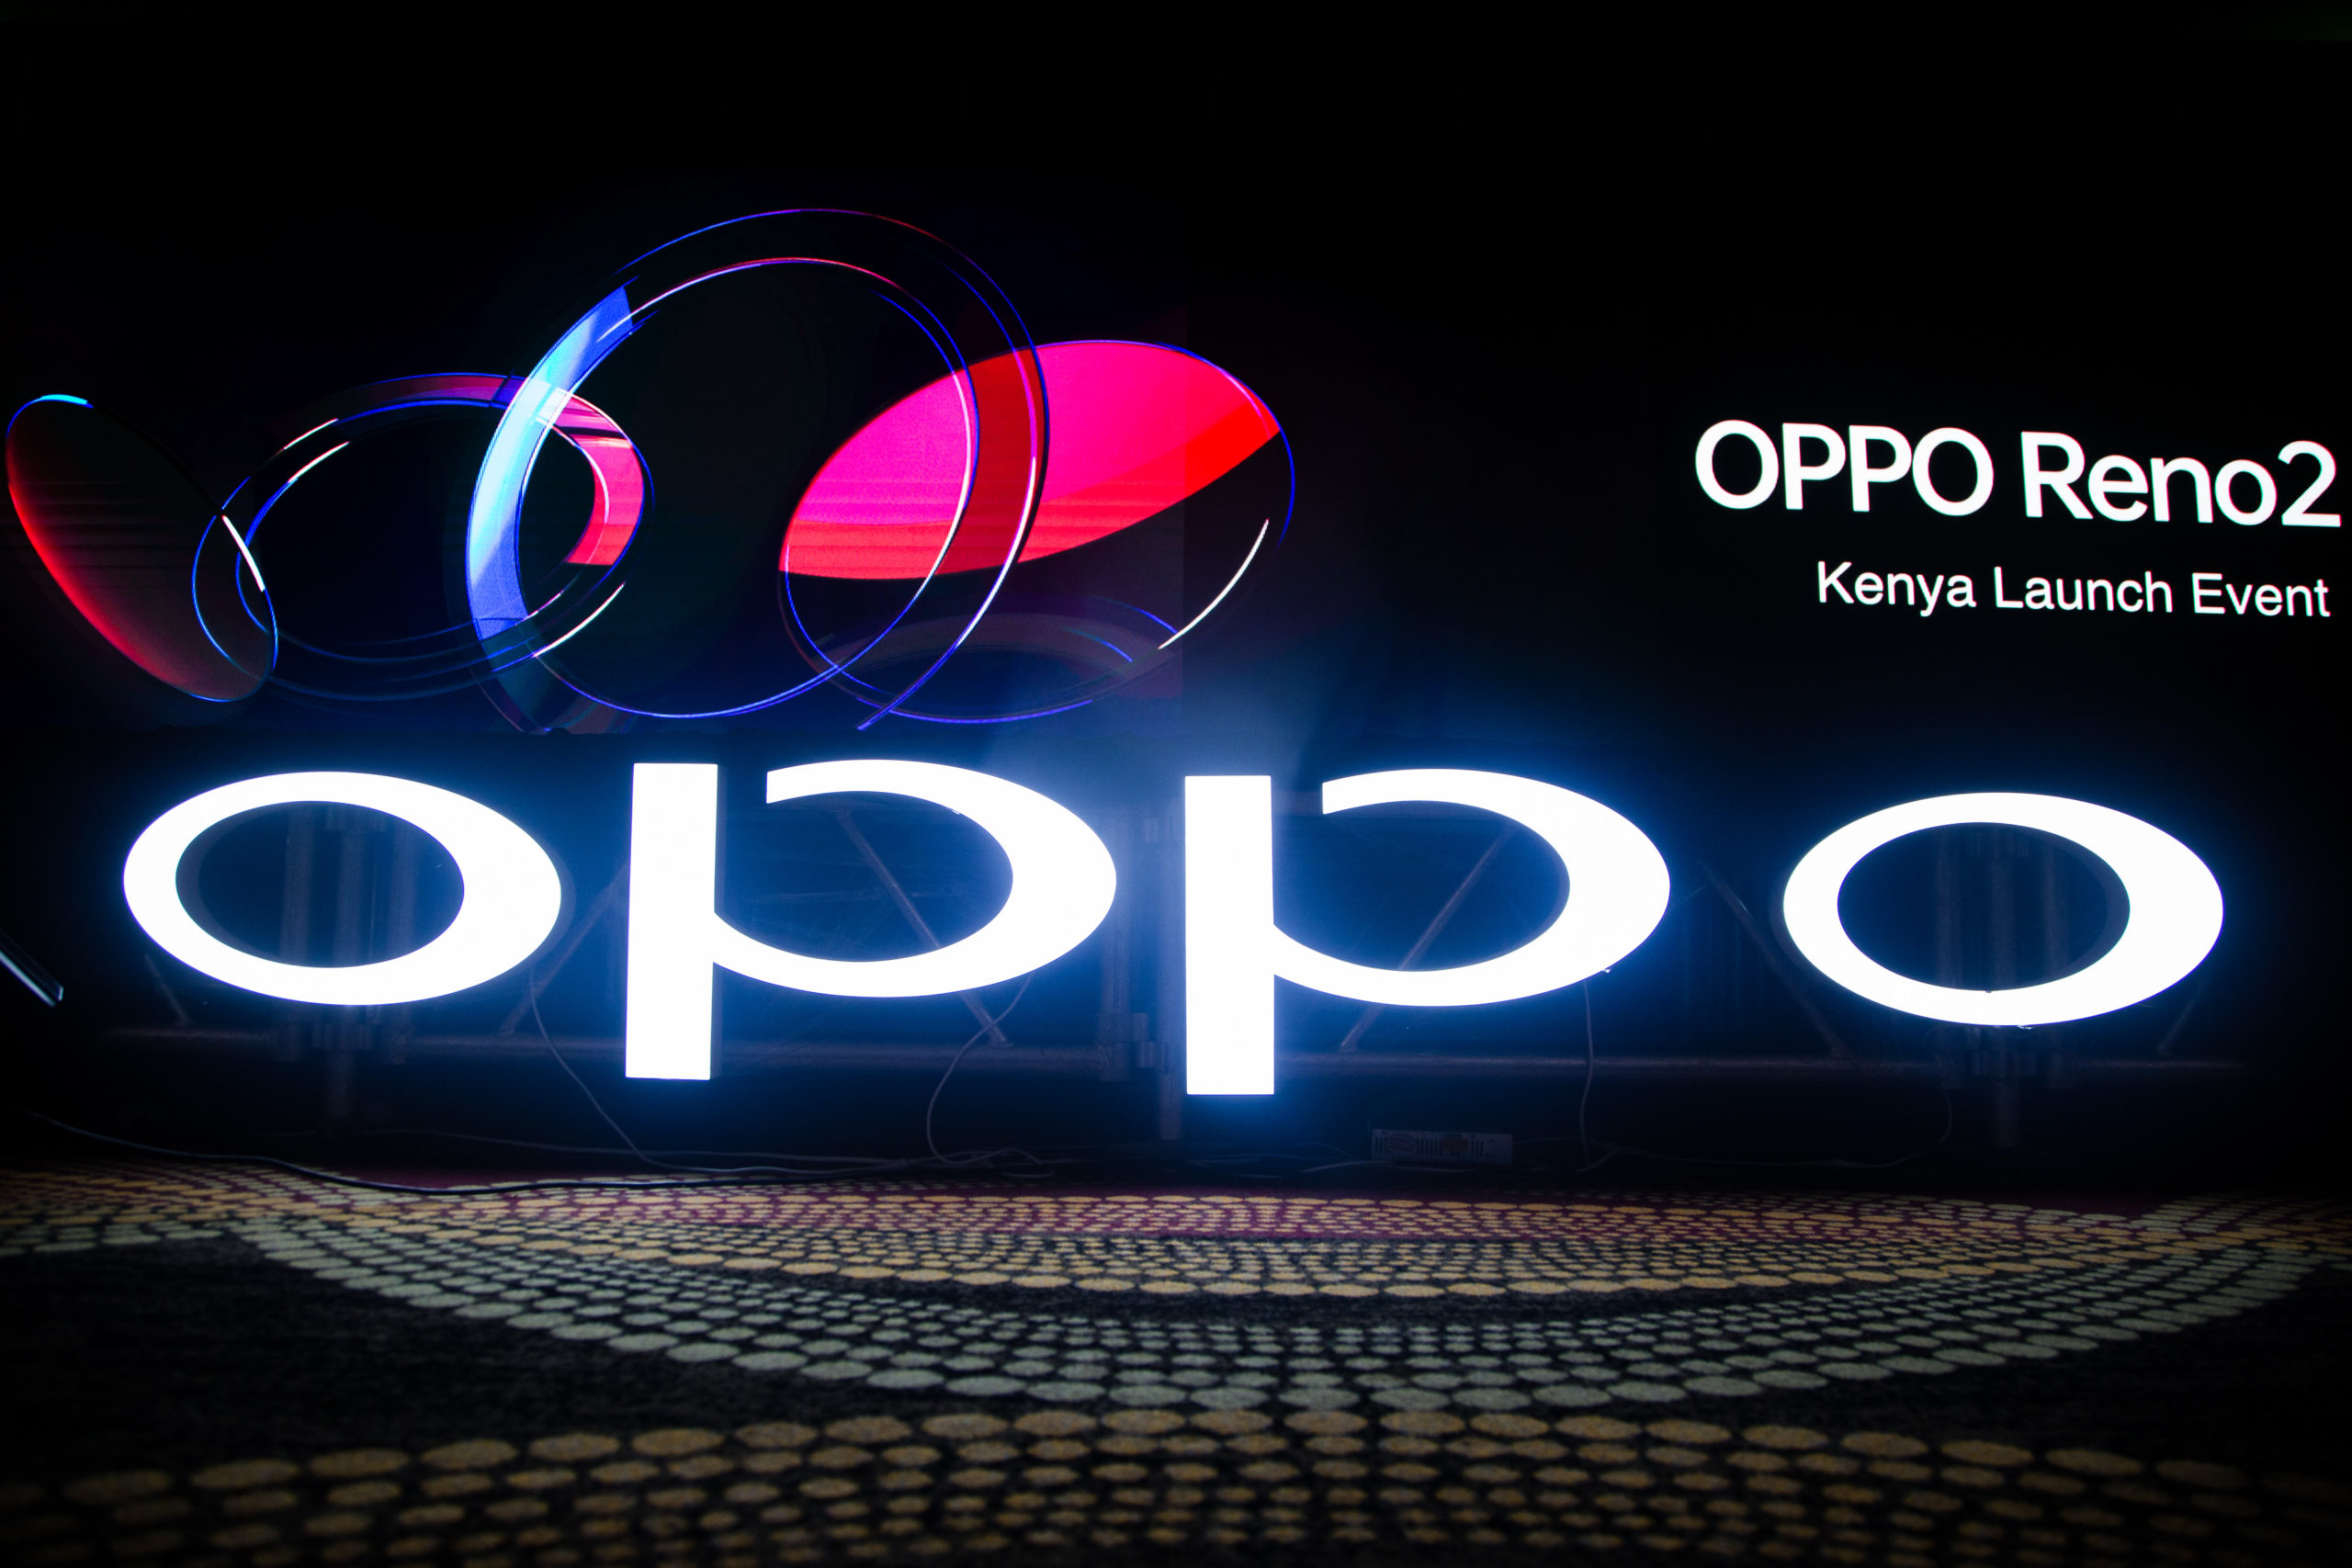 OPPO sets new heights in the vibrant phone market with an innovative new release – The Reno2 F model!